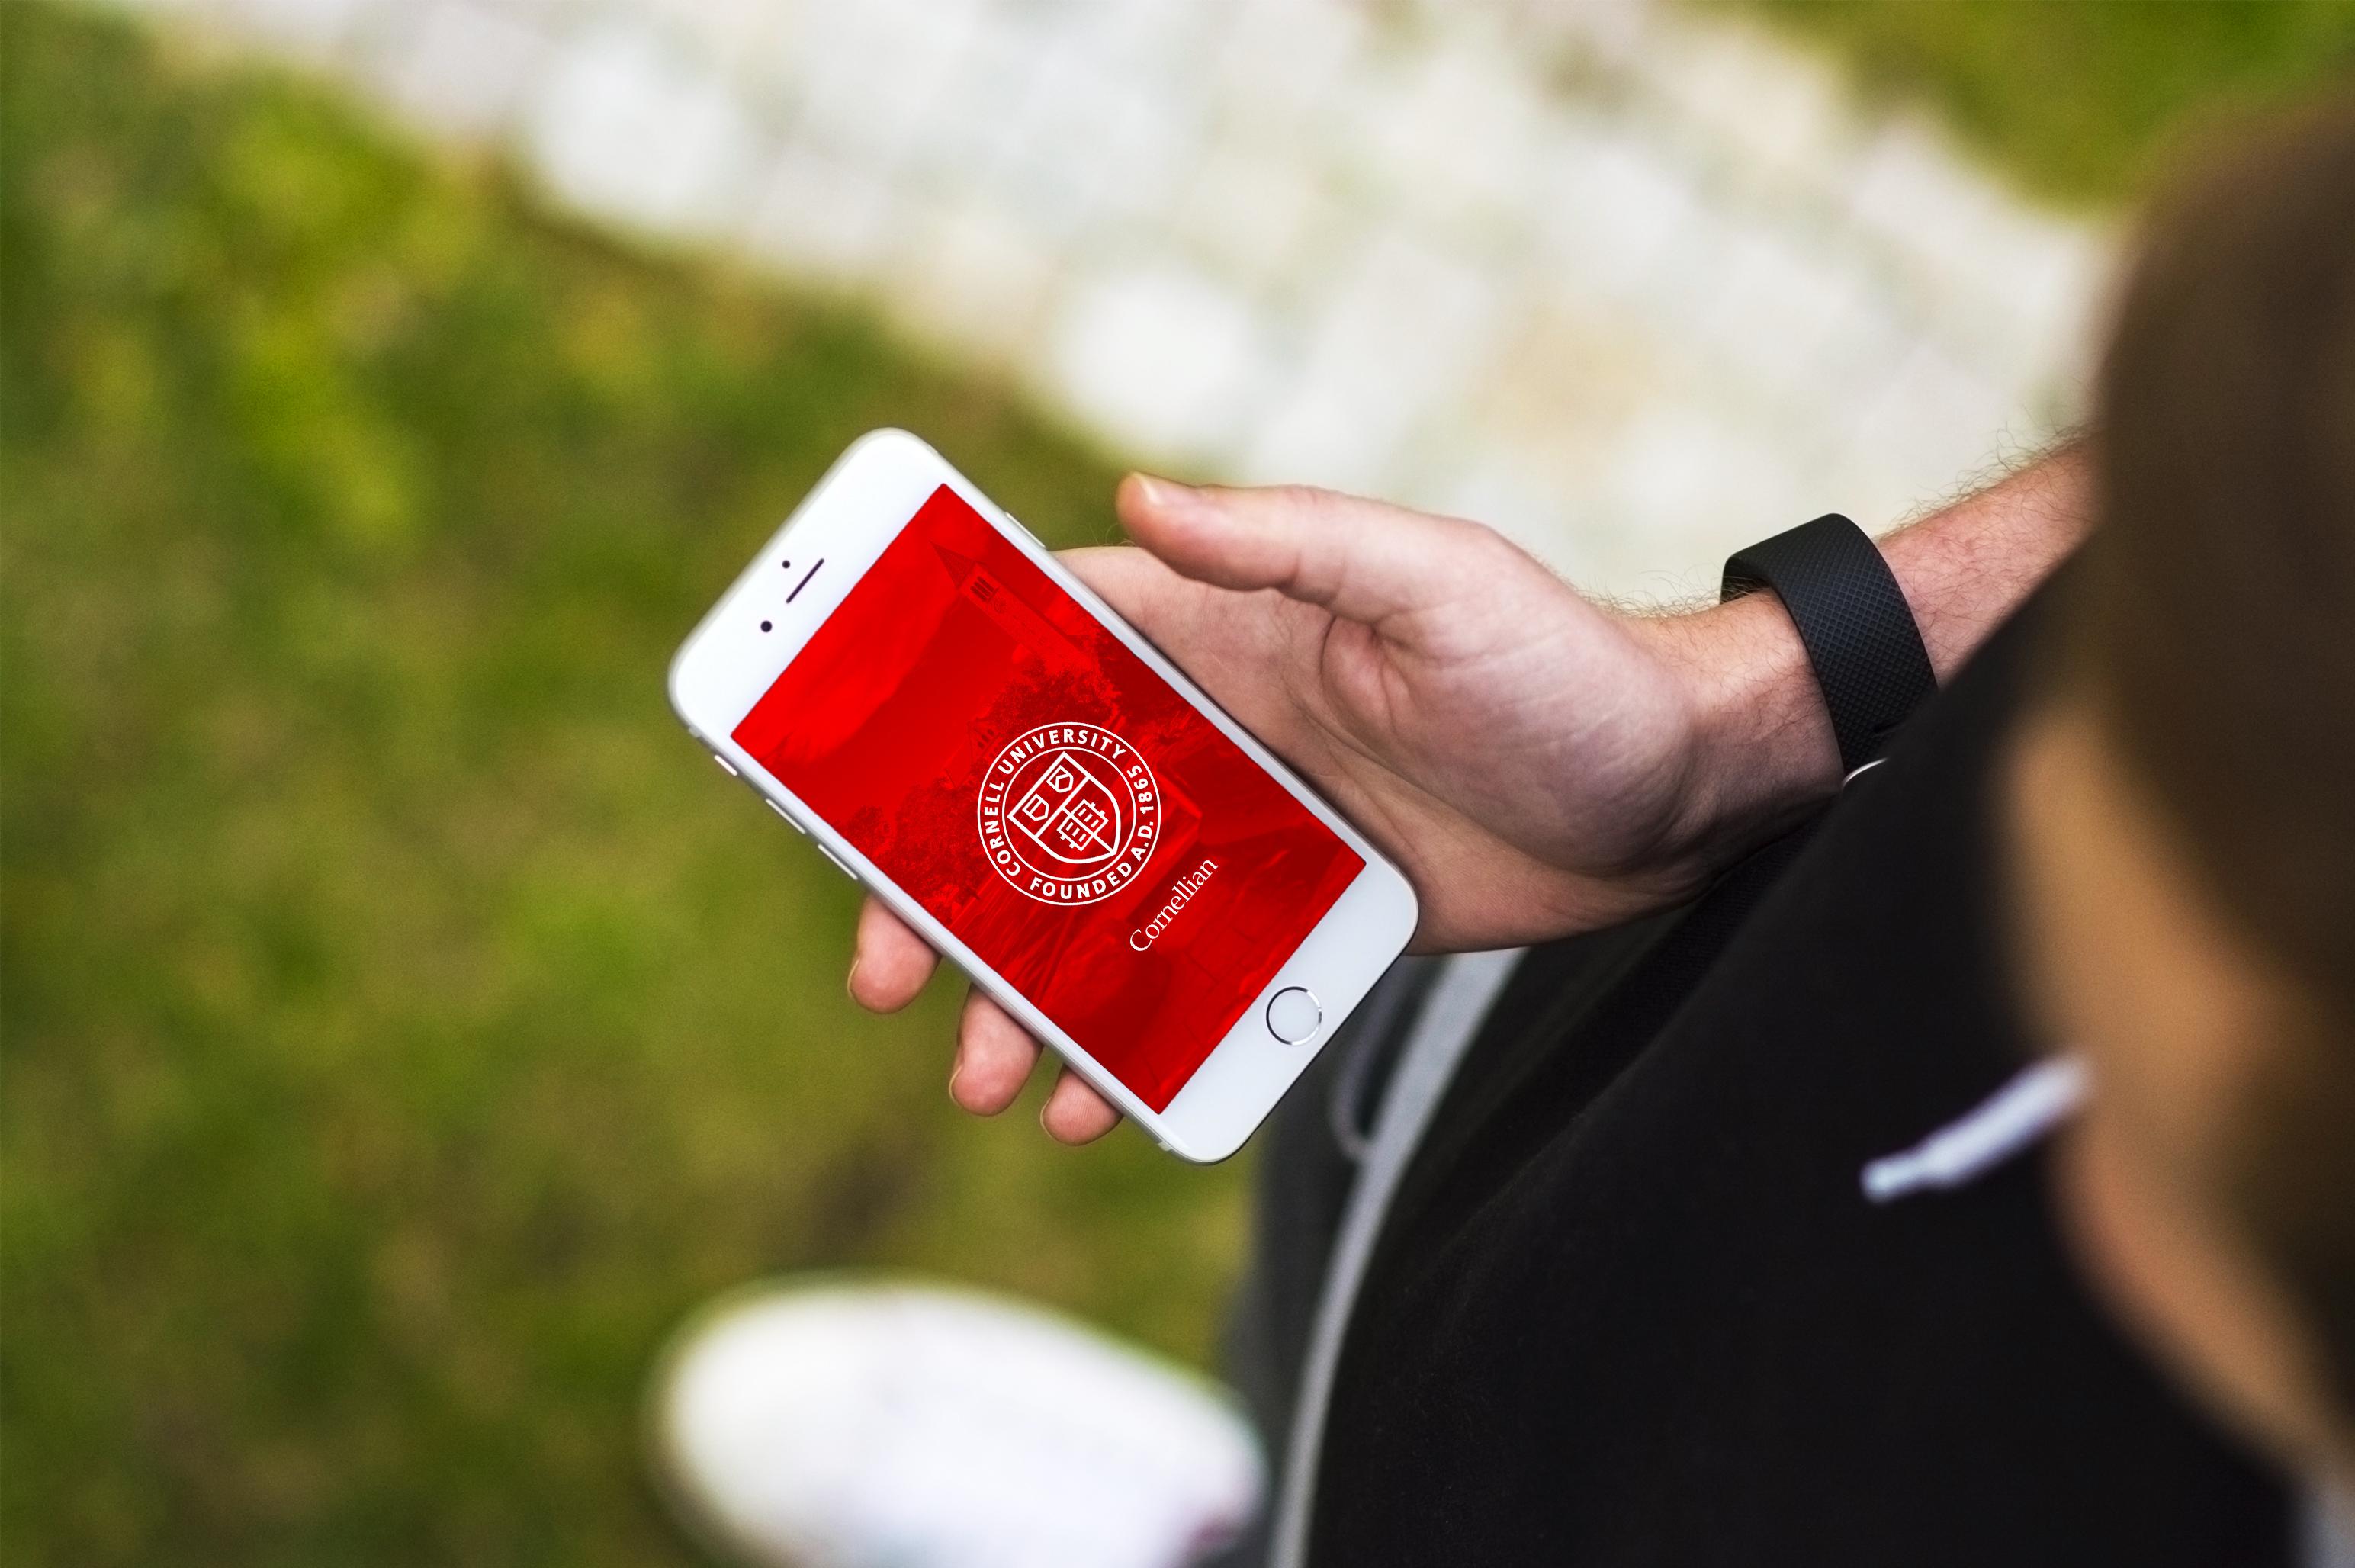 Mobile Phone Backgrounds - Alumni, parents, and friends | Cornell University